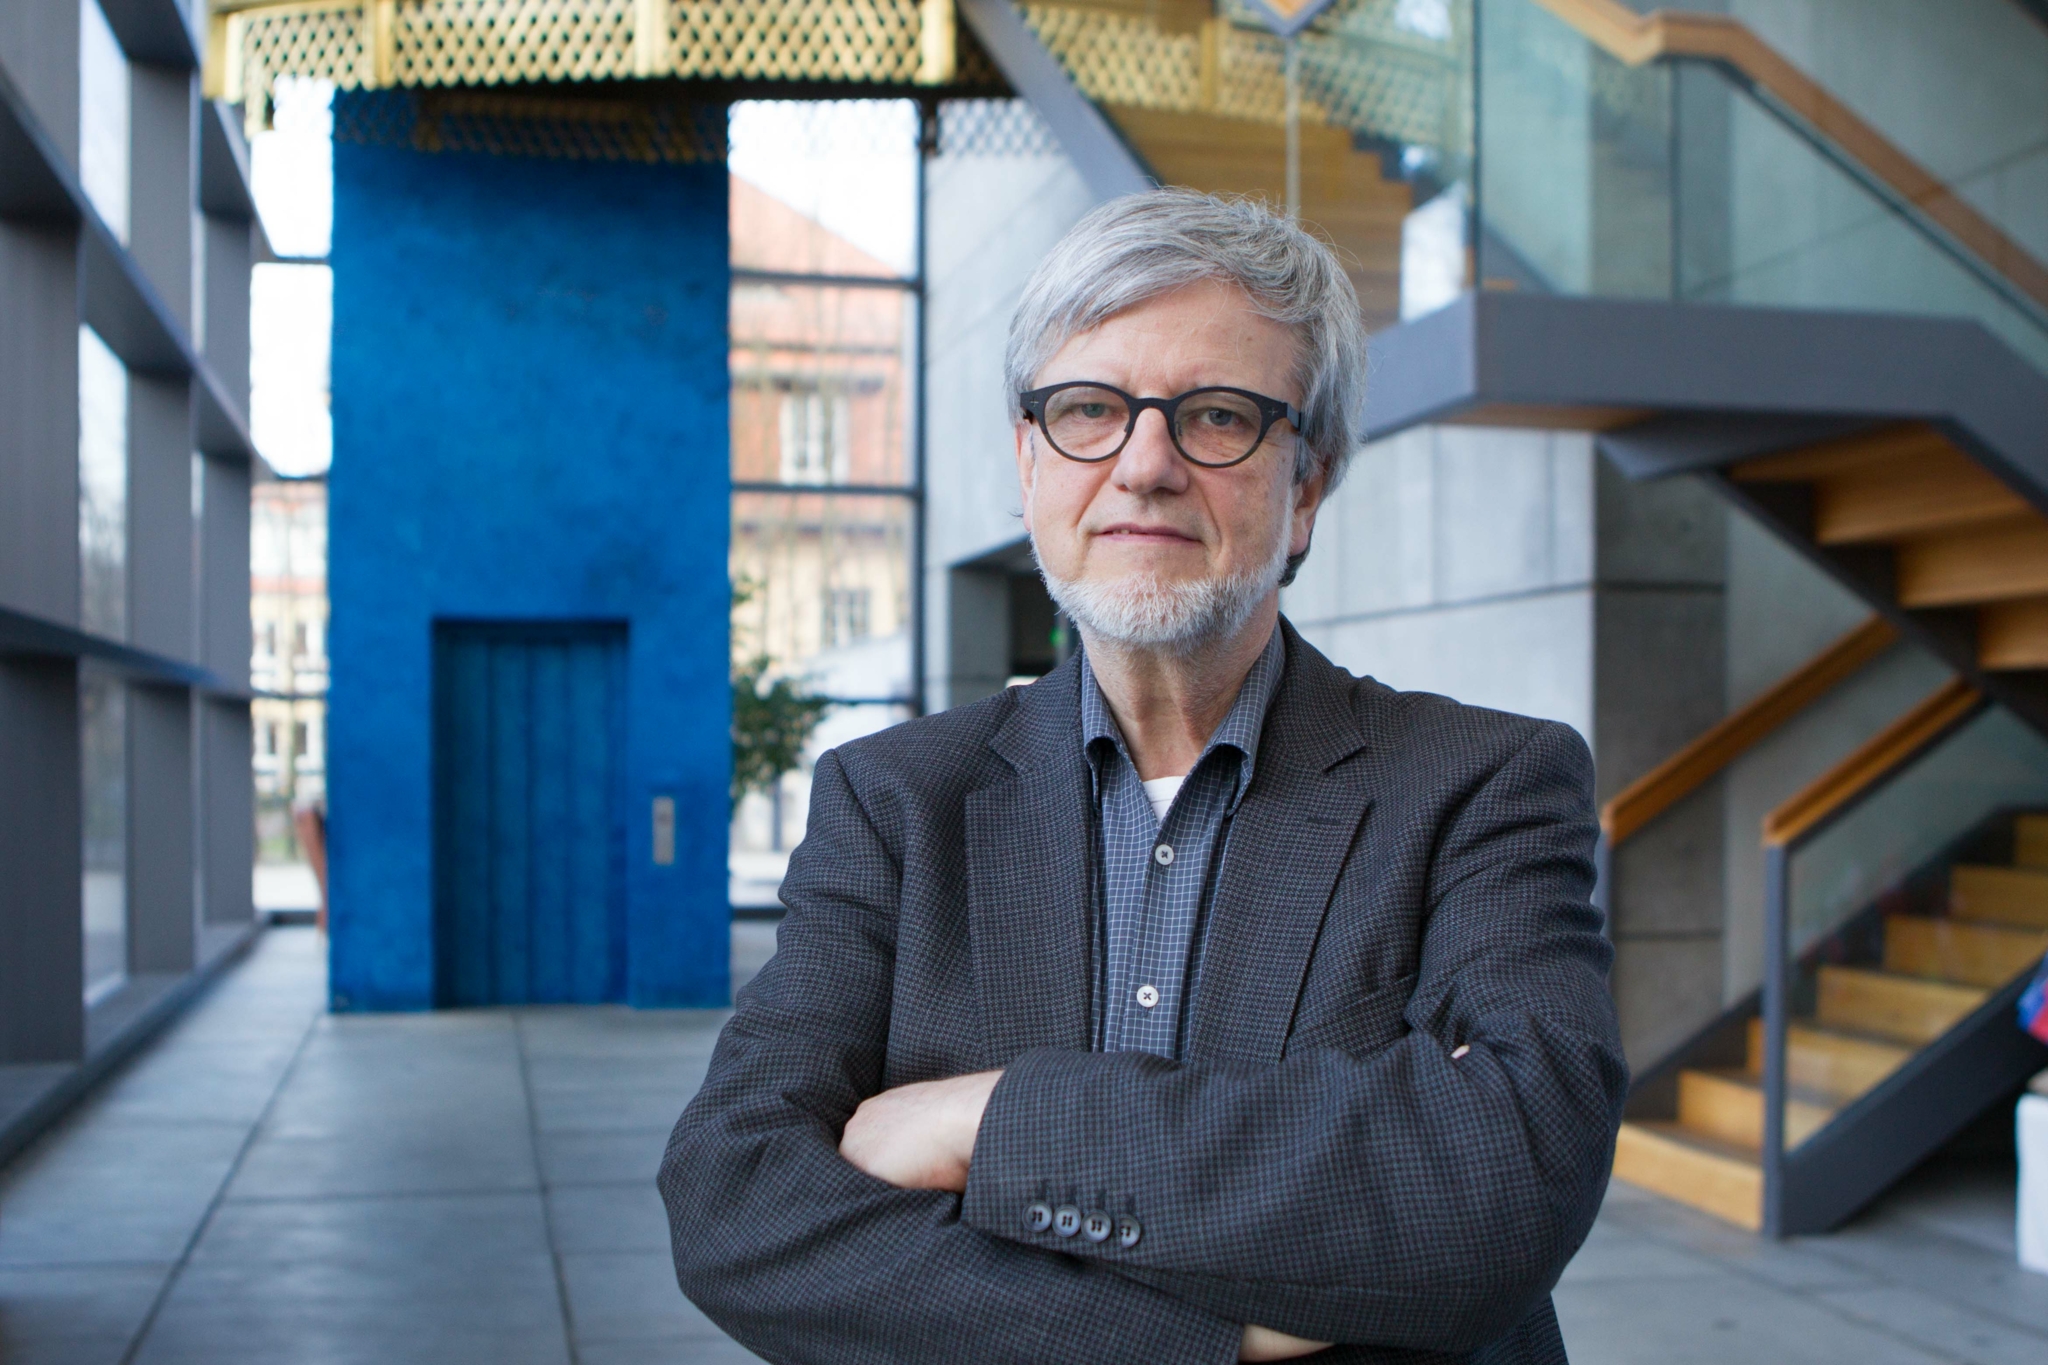 The photo shows sustainability researcher Prof. Dr. Ortwin Renn in front of a modern building.